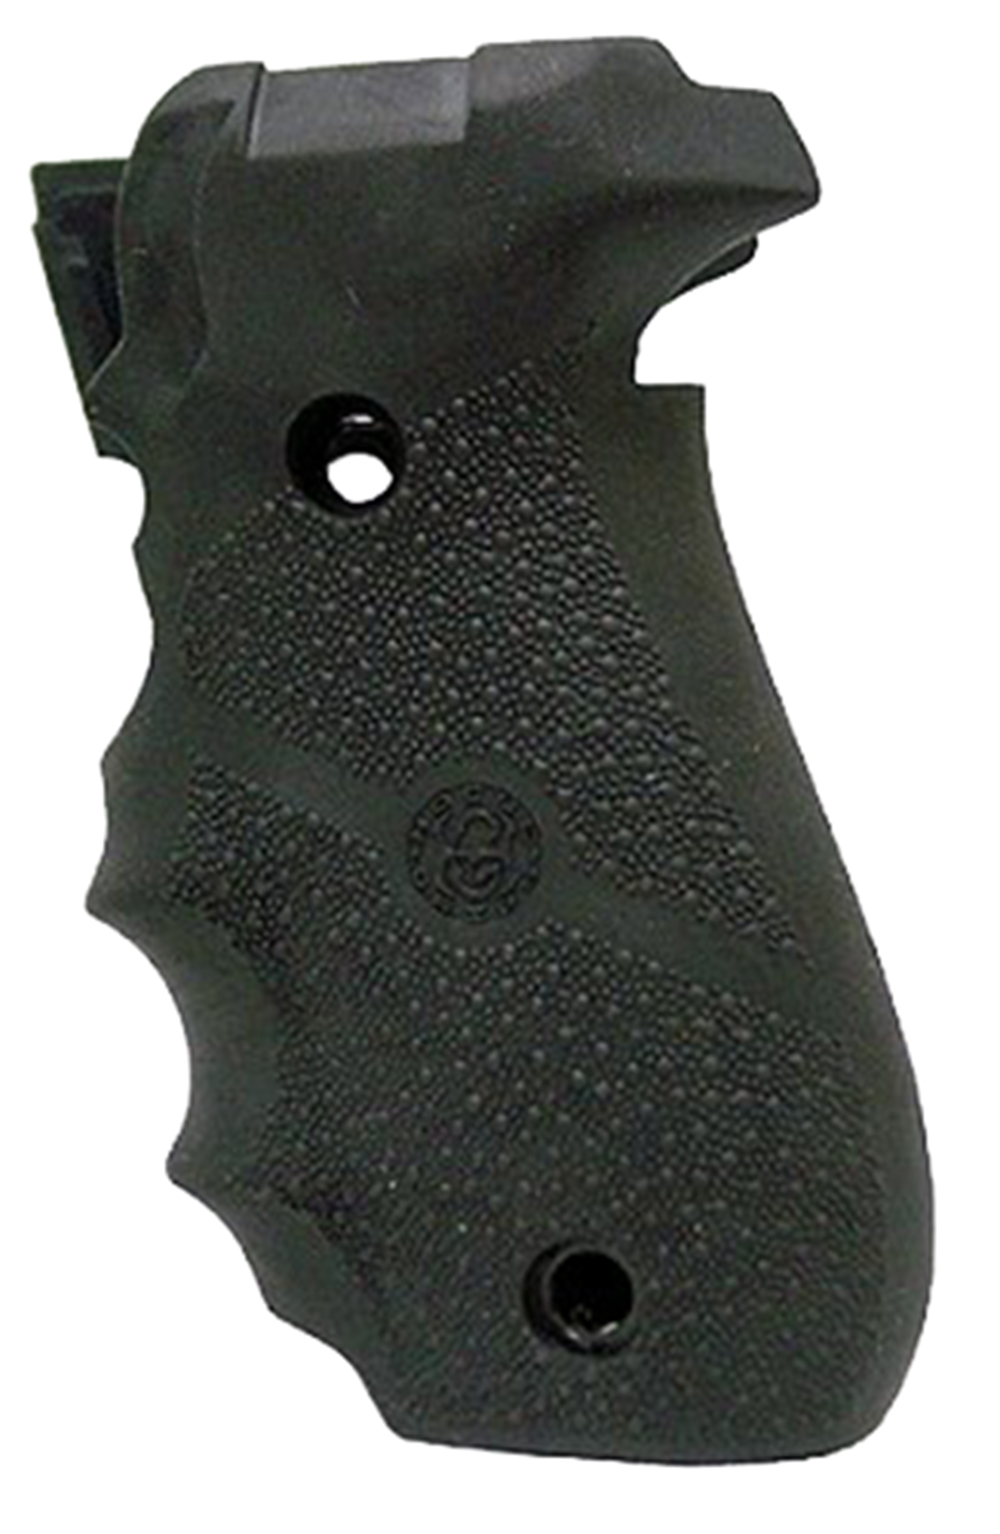 Hogue 26000 Rubber Grip  Black with Finger Grooves for Sig P226